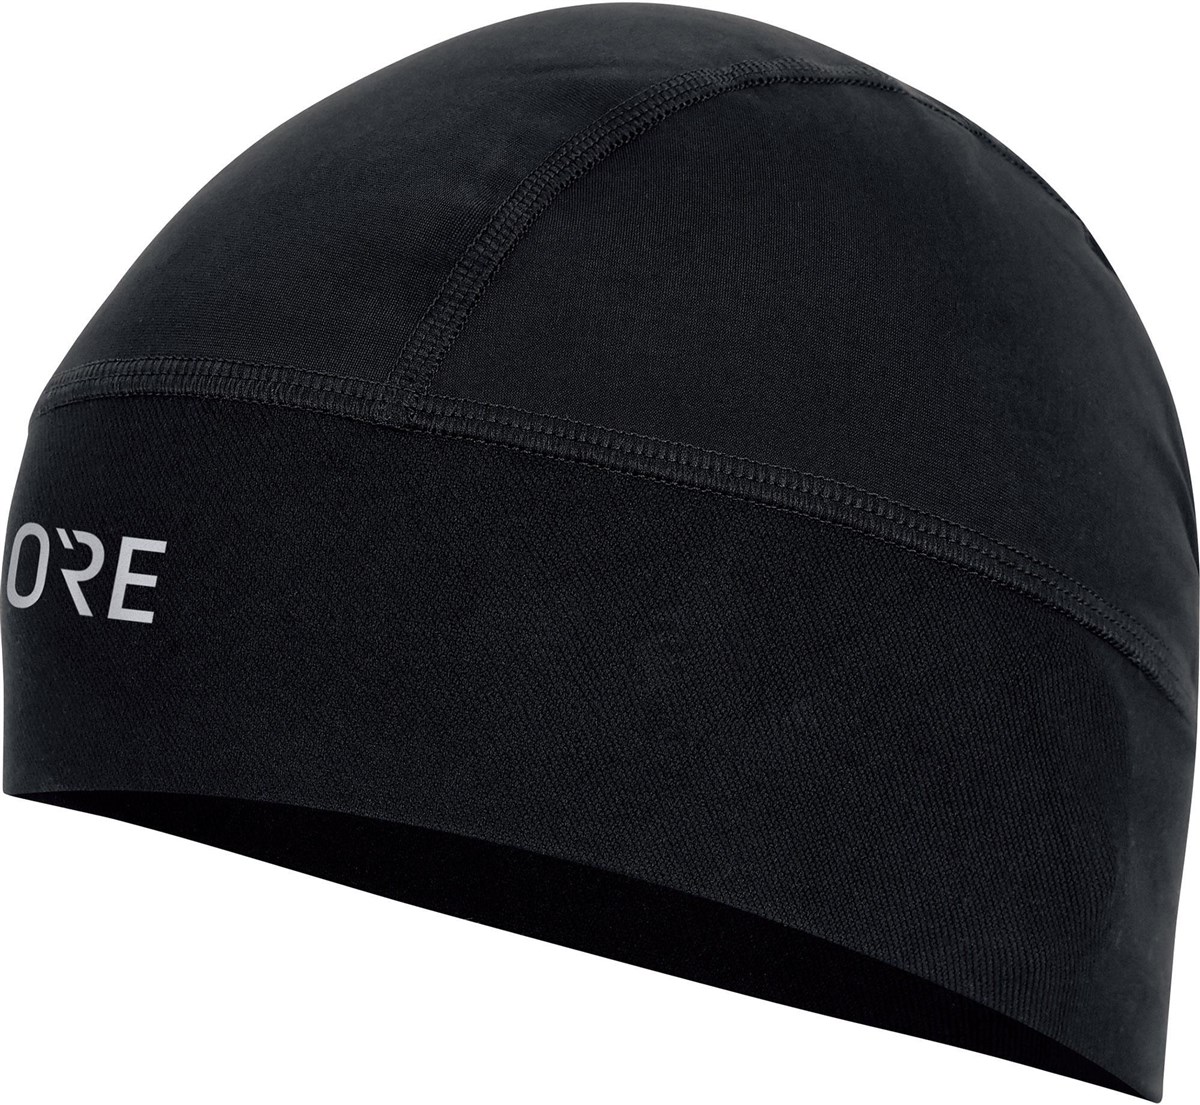 Gore Beanie product image